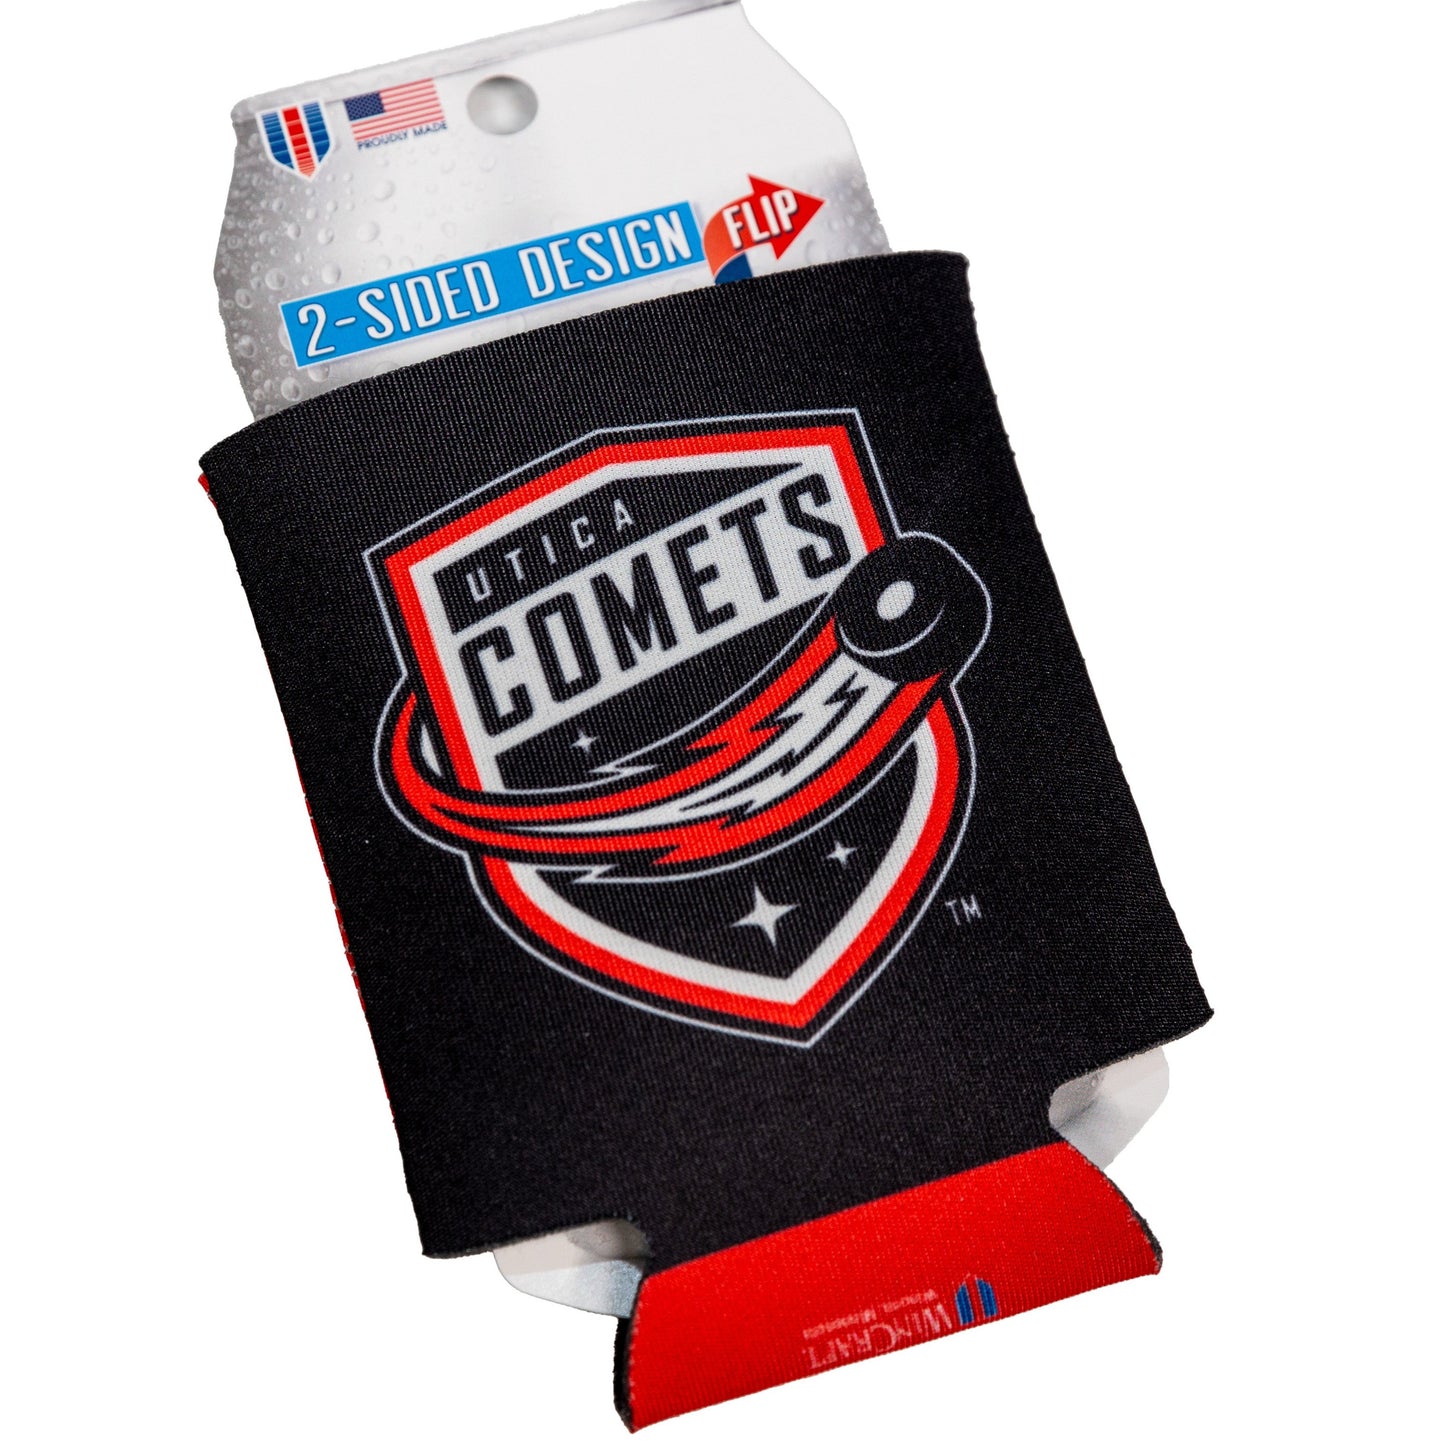 Utica Comets Novelty Wincraft Shield Logo Can Cooler